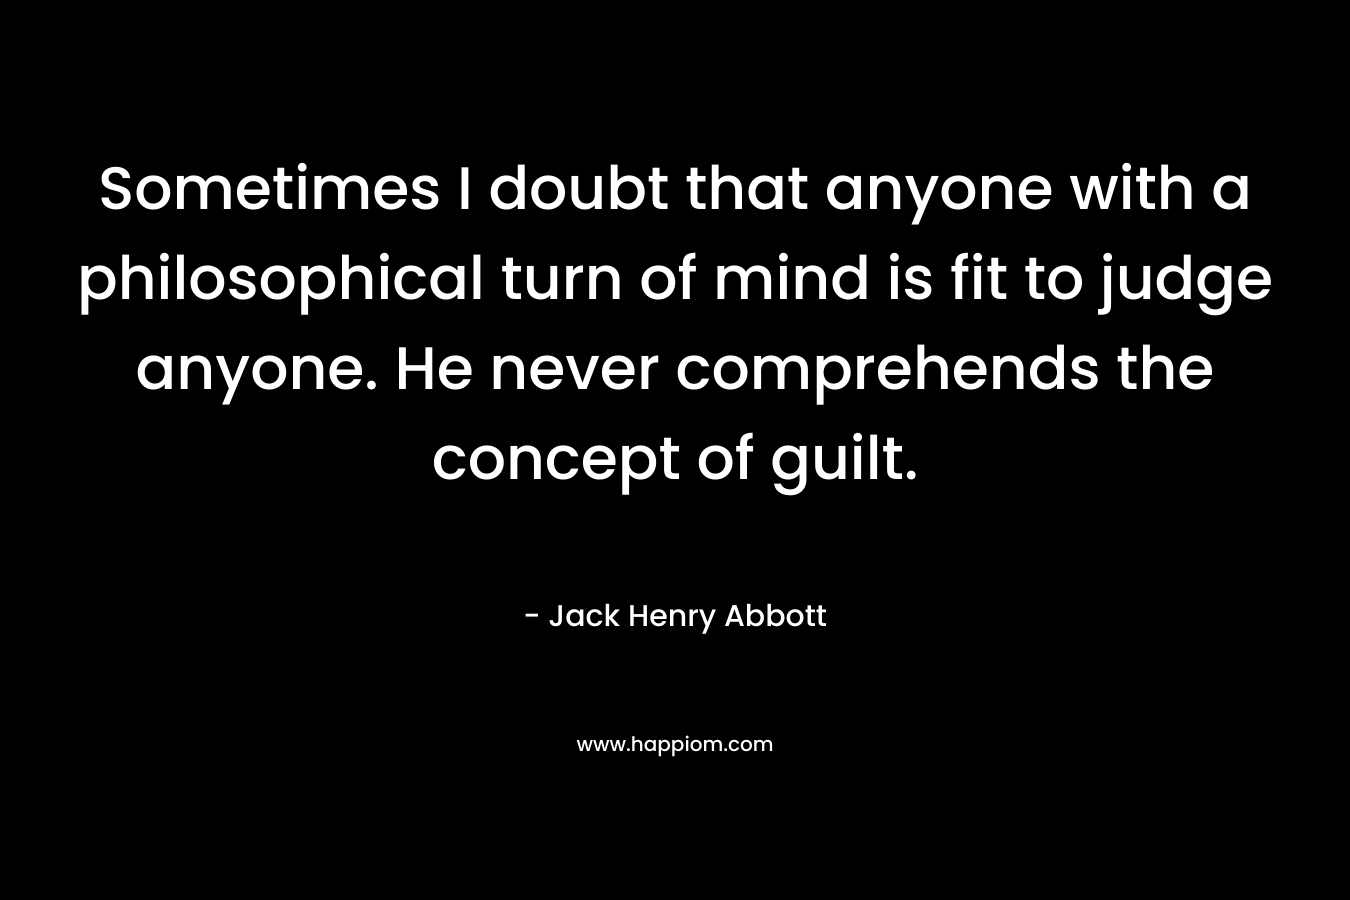 Sometimes I doubt that anyone with a philosophical turn of mind is fit to judge anyone. He never comprehends the concept of guilt.